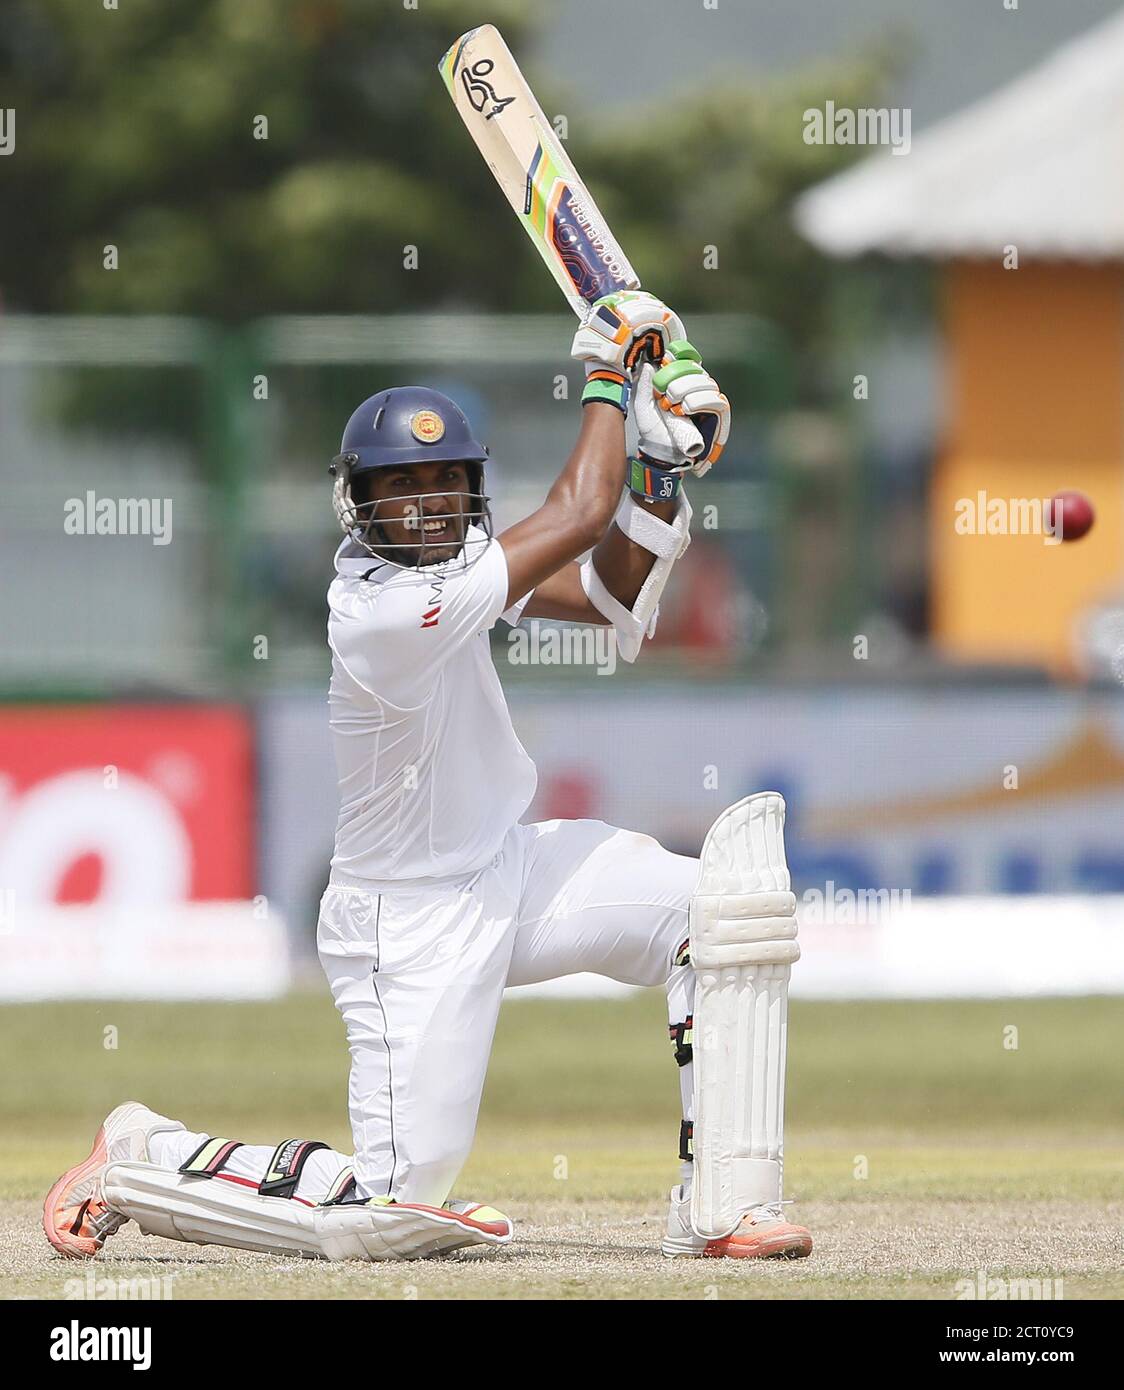 Sri Lanka's Dinesh Chandimal plays a shot during the first day of their first test cricket match against India in Galle, August 12, 2015. REUTERS/Dinuka Liyanawatte Stock Photo